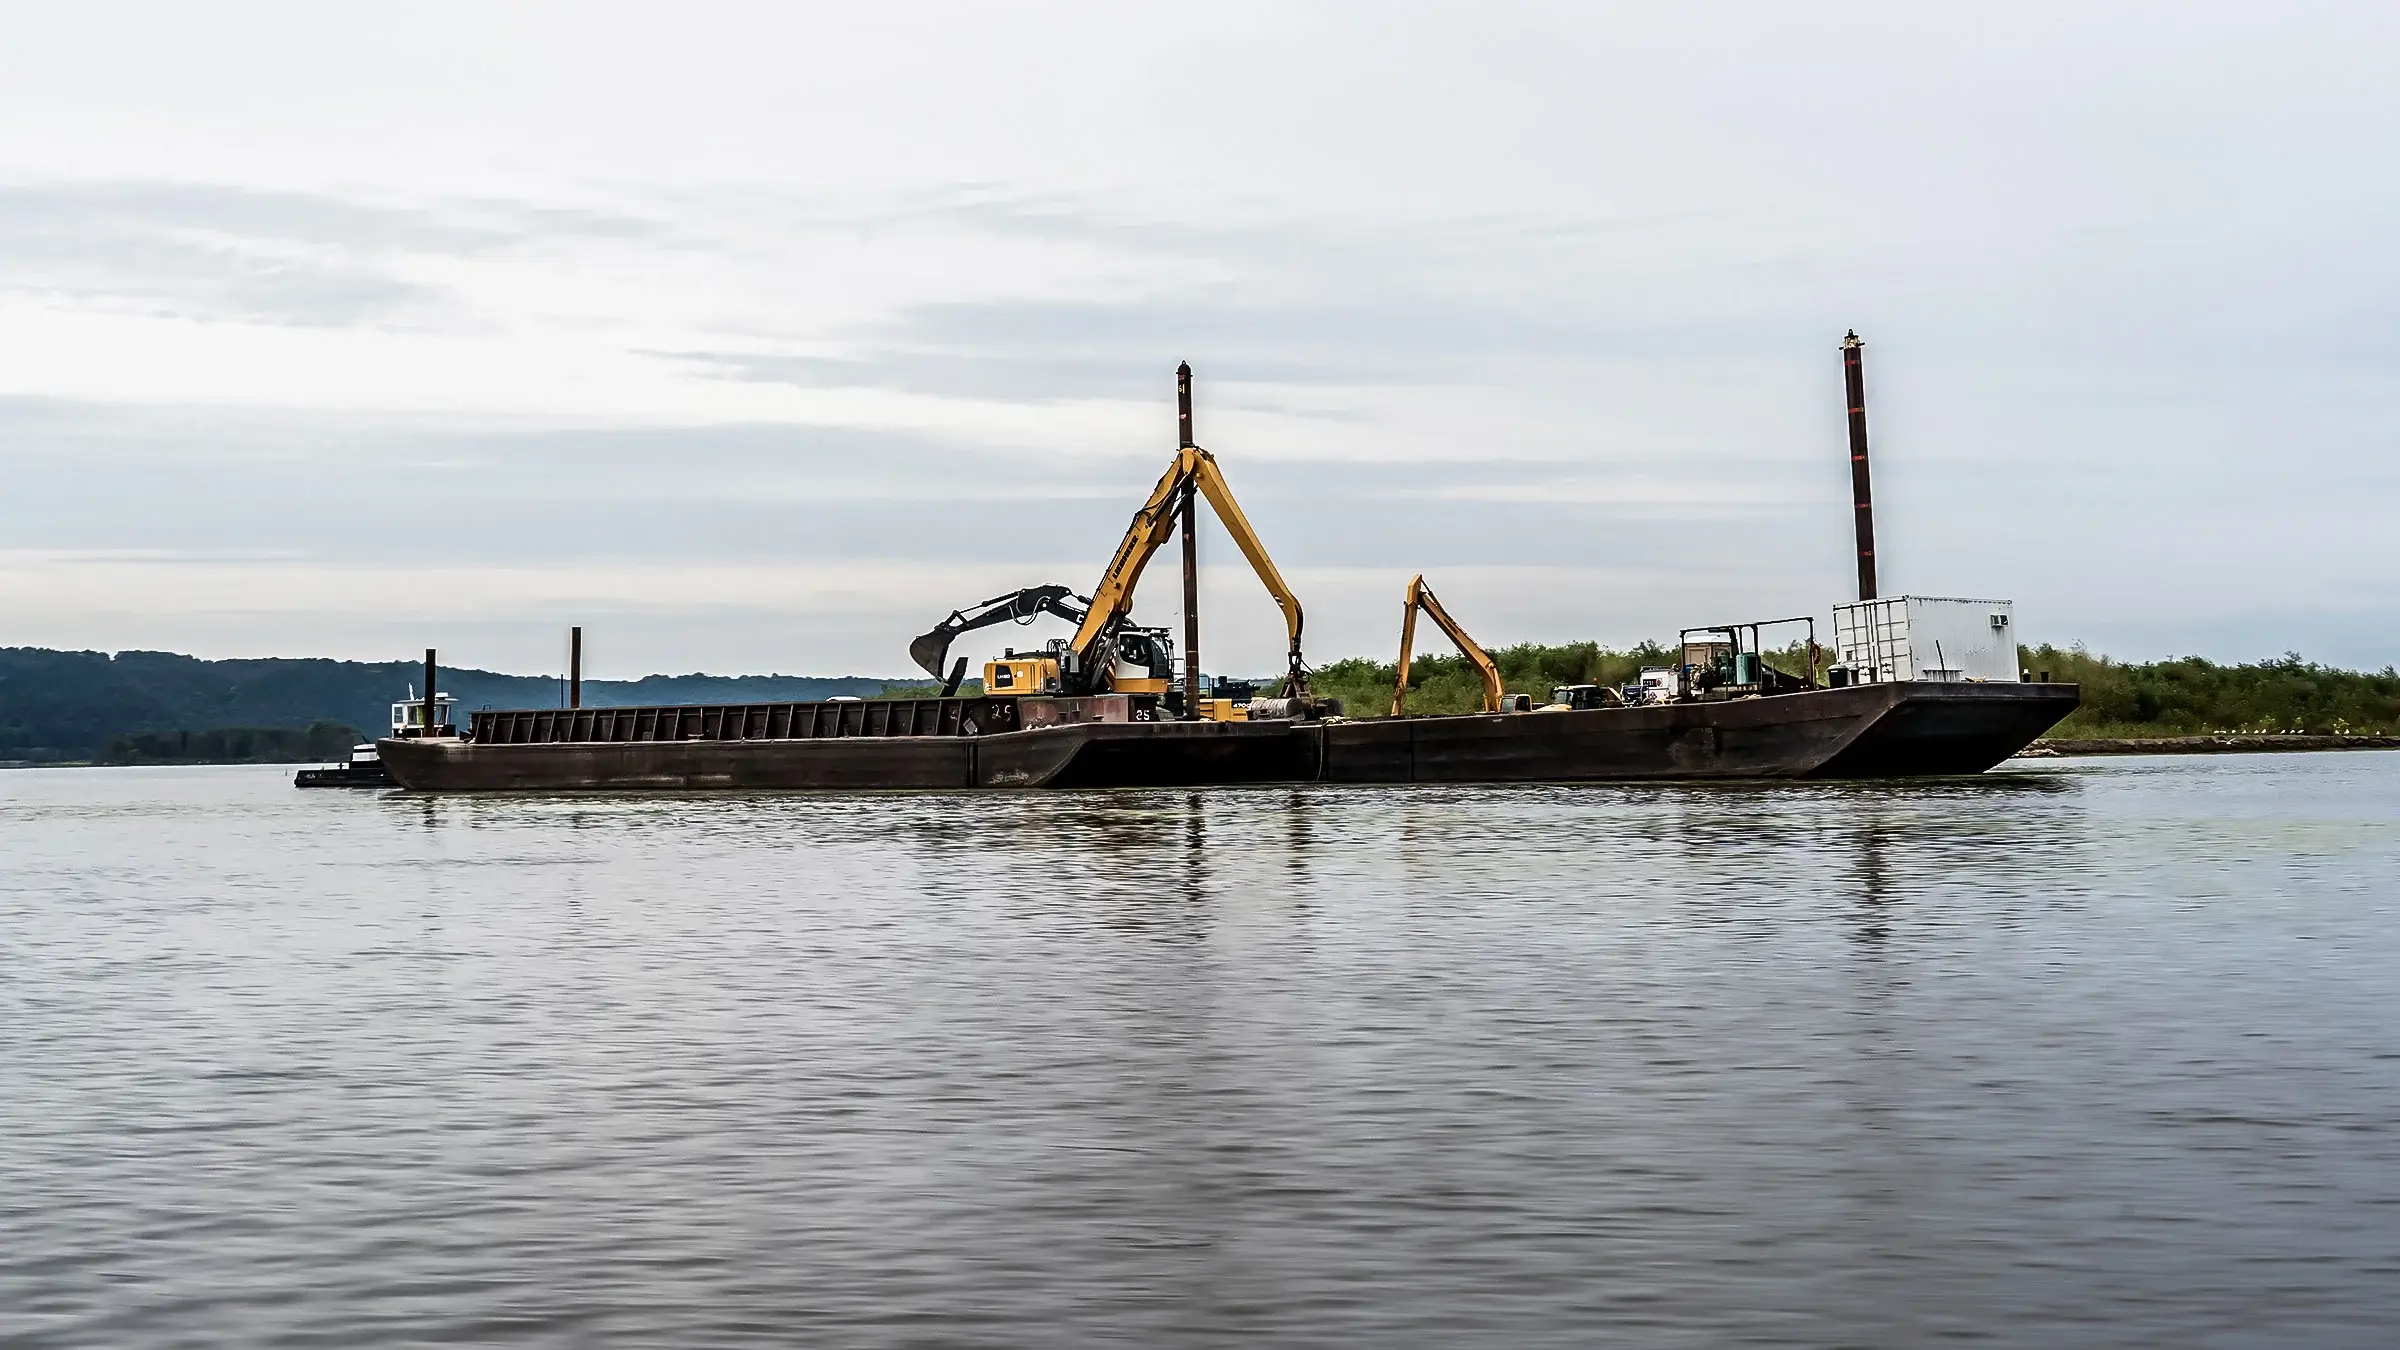 Excavators transfer materials from one barge to another on a lake